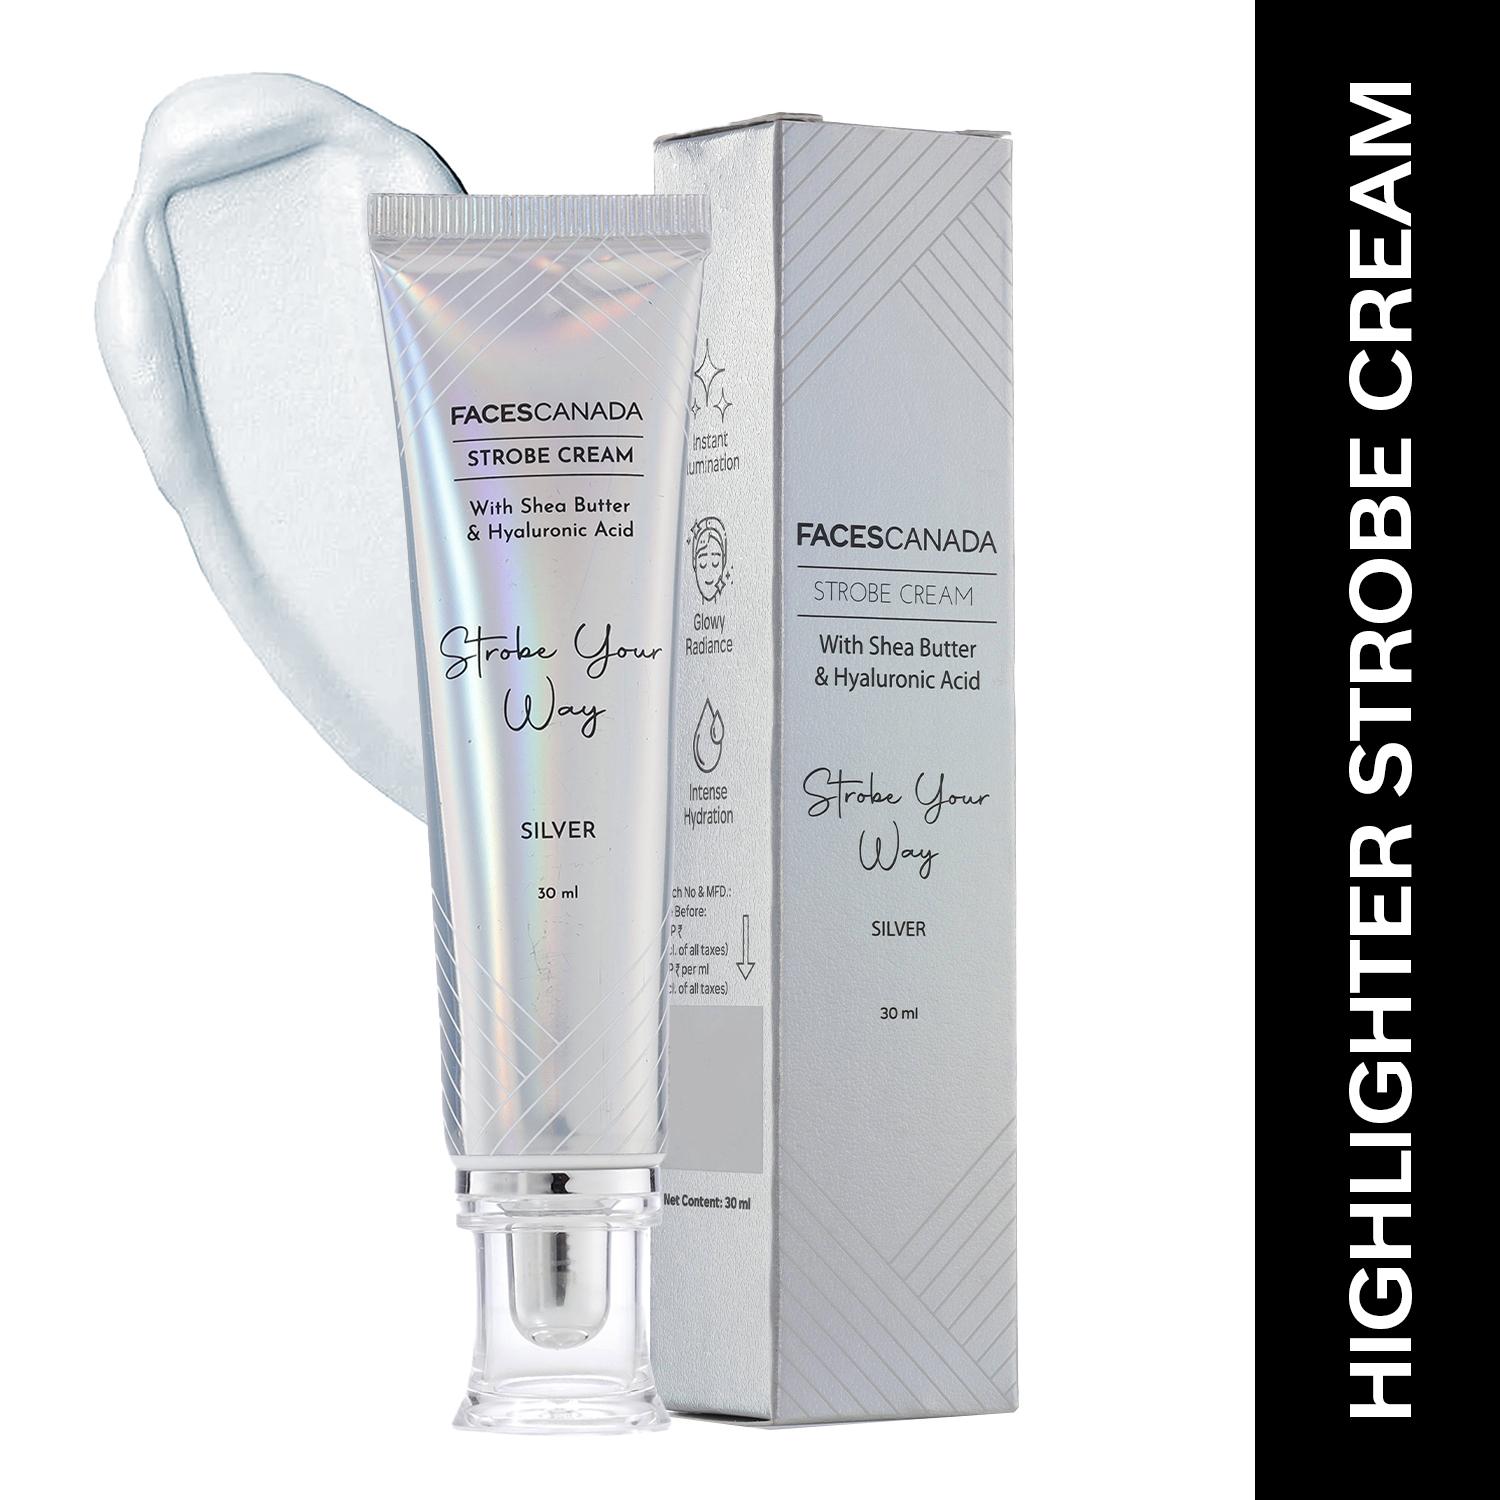 Faces Canada | Faces Canada Strobe Cream, Shea Butter & Hyaluronic Acid,Flawless Radiant Skin - Silver (30 g)